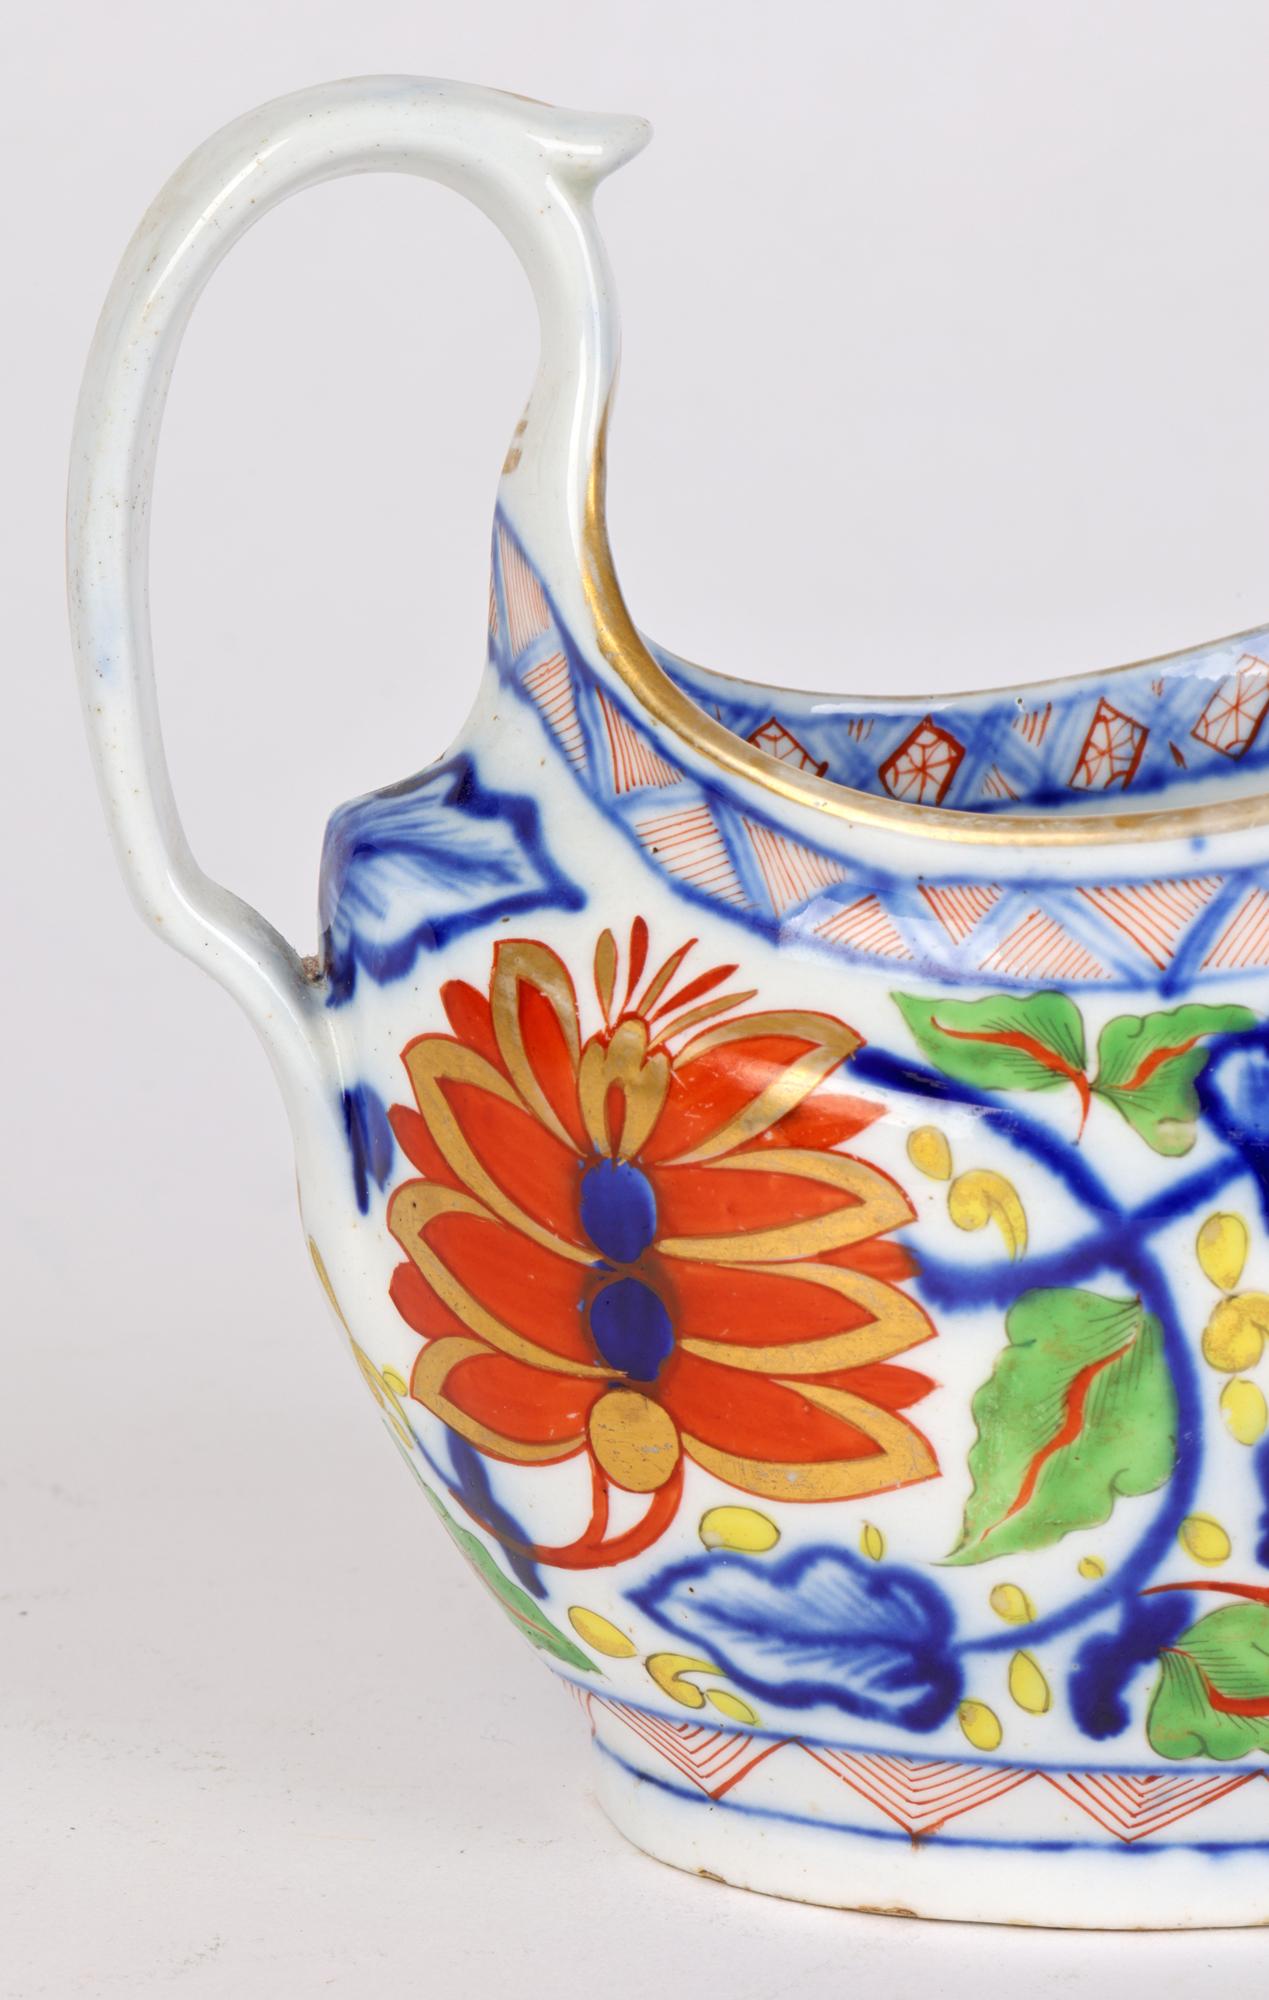 A fine quality antique English porcelain, possibly Coalport, London shape sauce jug decorated in an Imari pattern and dating from around 1810. The sauce jug is lightly potted and is decorated in underglaze blue and overpainted with stylized floral